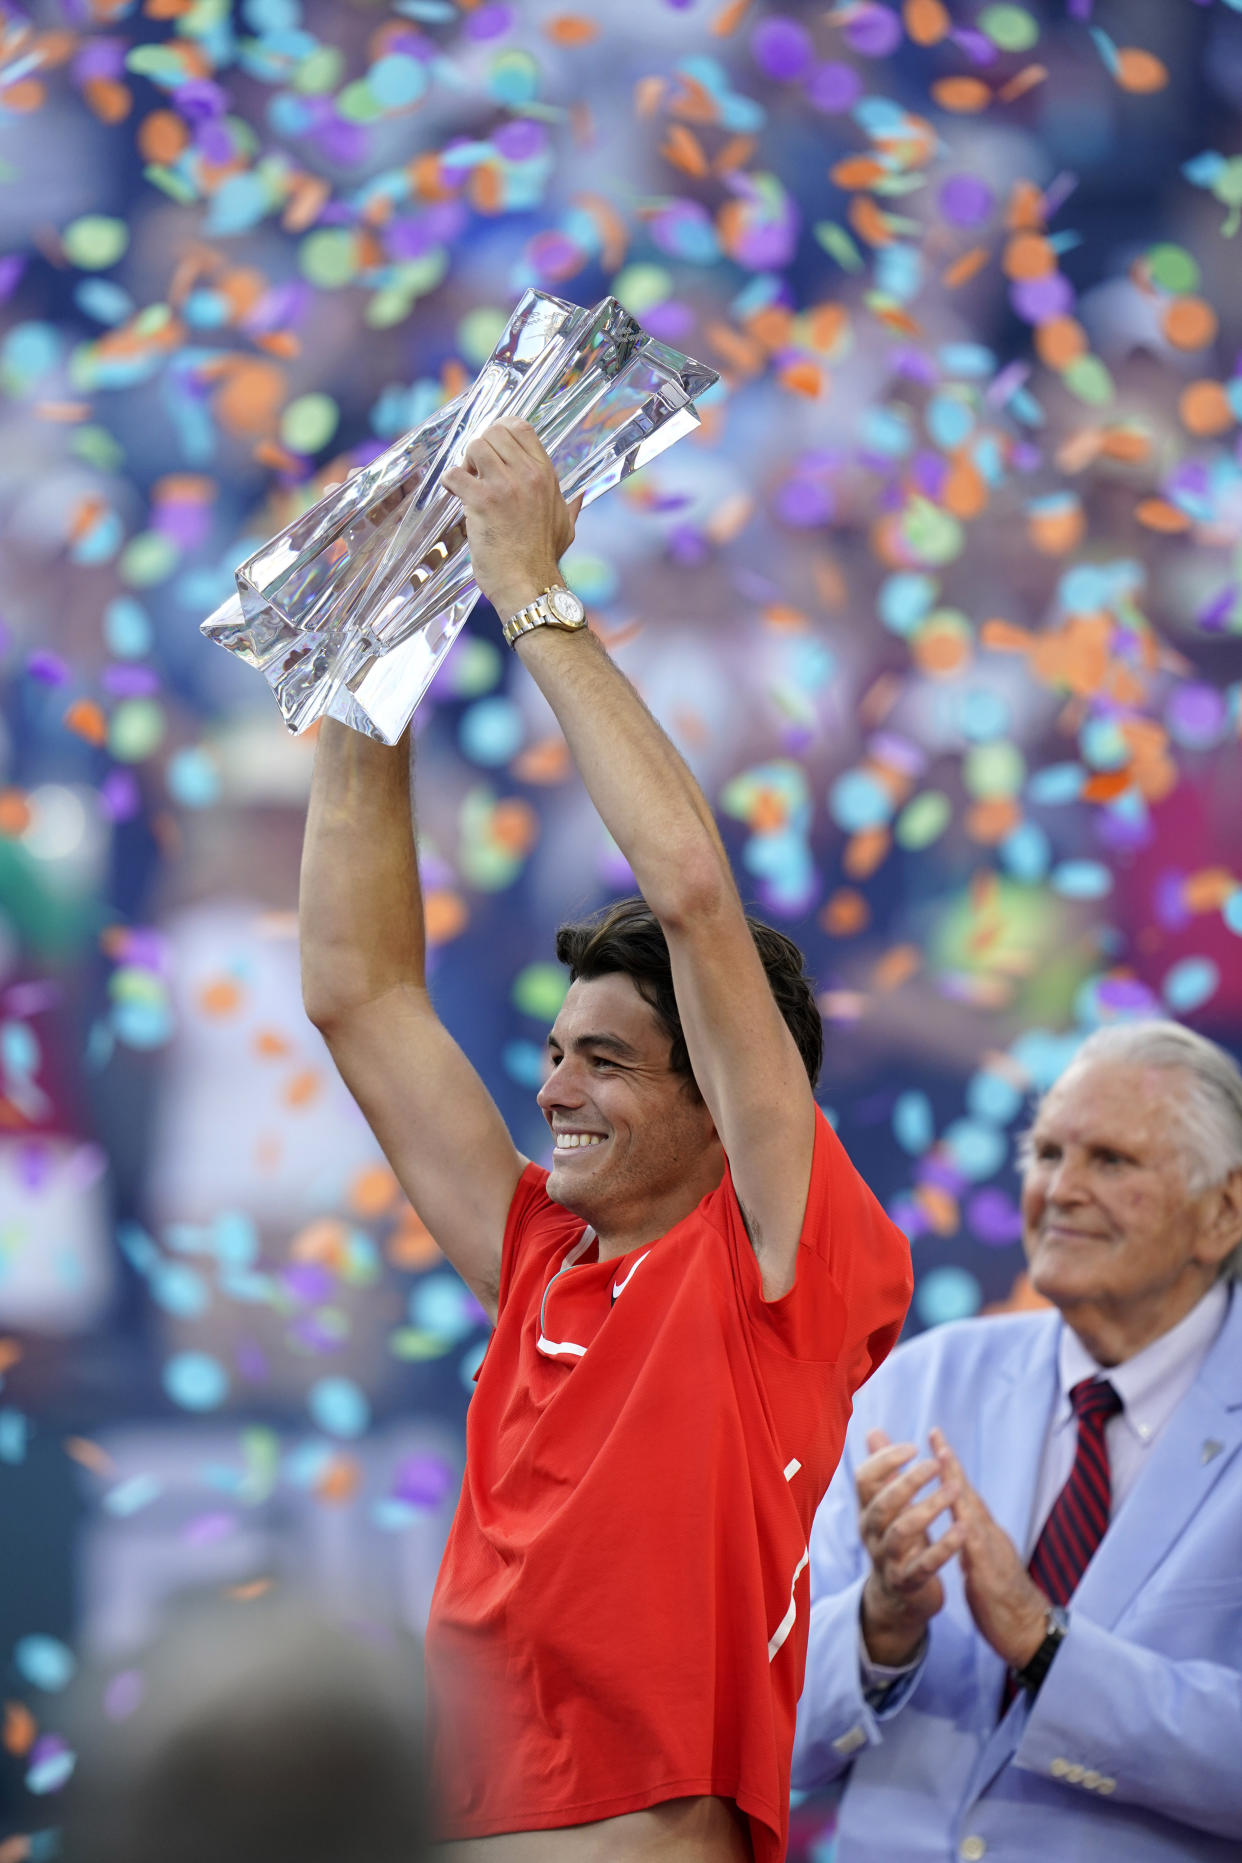 Taylor Fritz holds up his trophy after defeating Rafael Nadal, of Spain, during the men's singles finals at the BNP Paribas Open tennis tournament Sunday, March 20, 2022, in Indian Wells, Calif. Fritz won 6-3, 7-6. (AP Photo/Marcio Jose Sanchez)